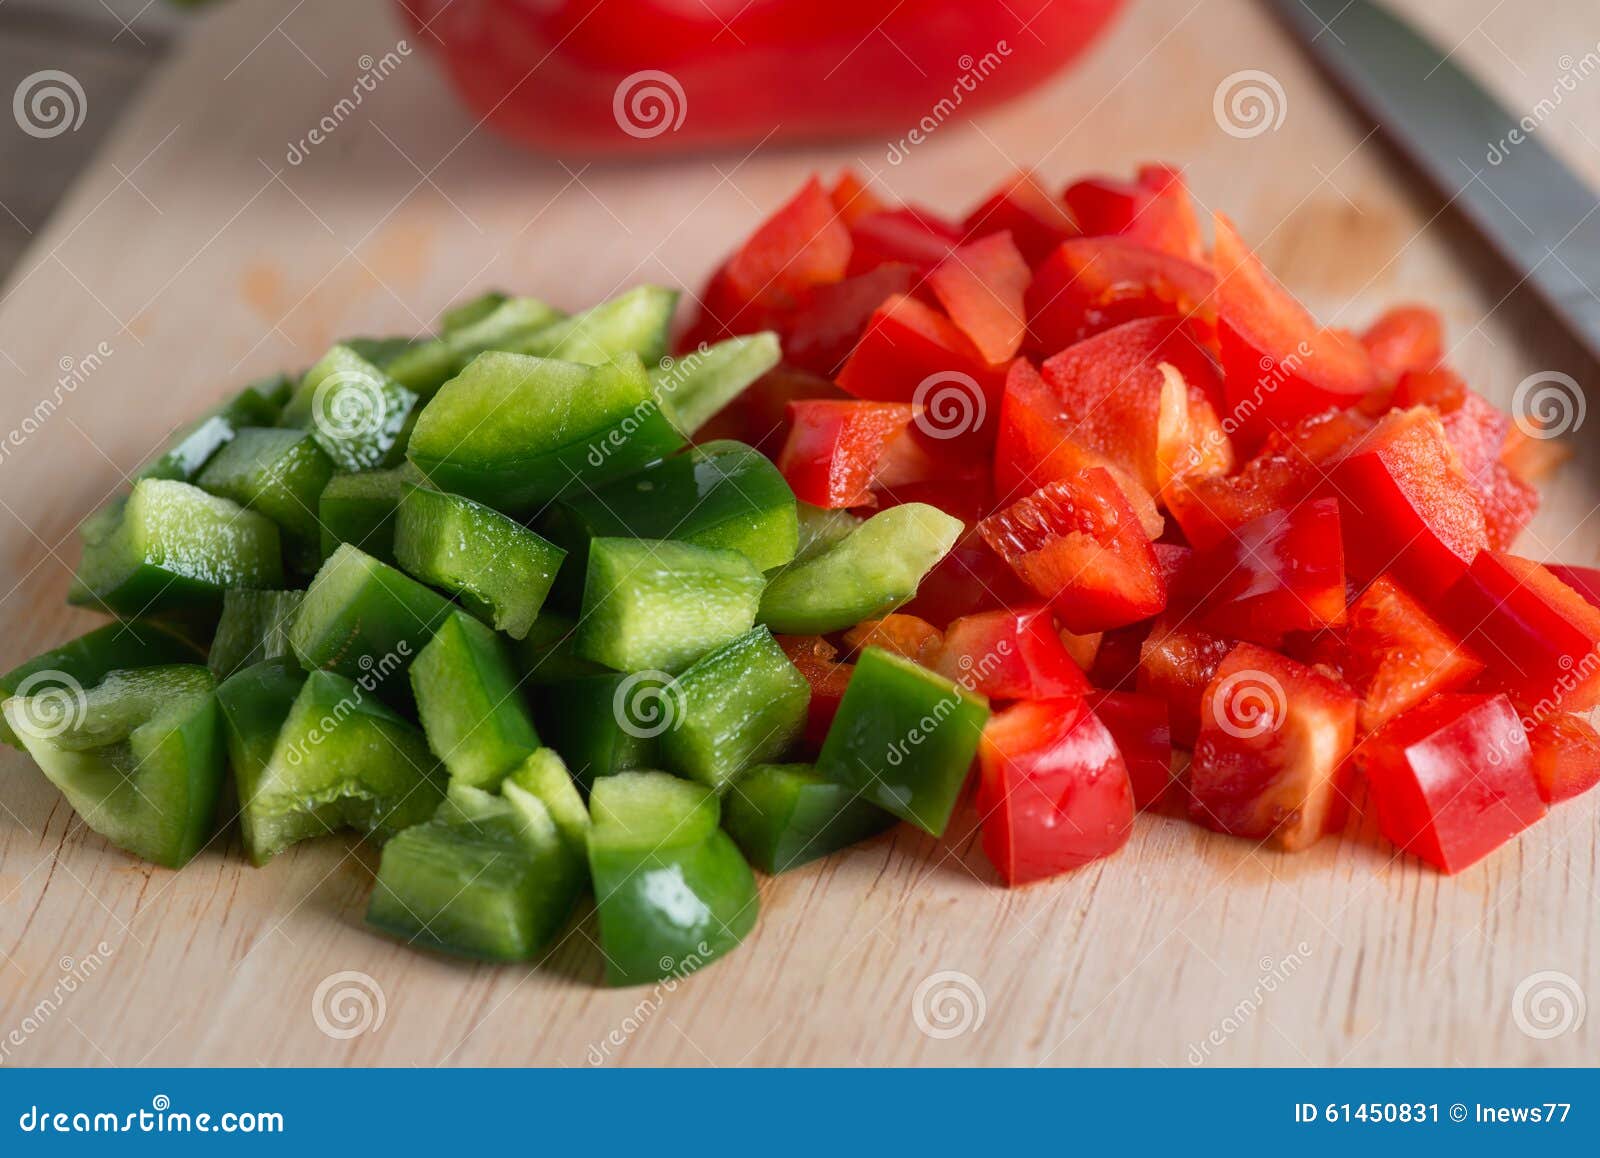 Chopped Green Bell Pepper And Red Bell Pepper Stock Image Image Of Cooking Piece